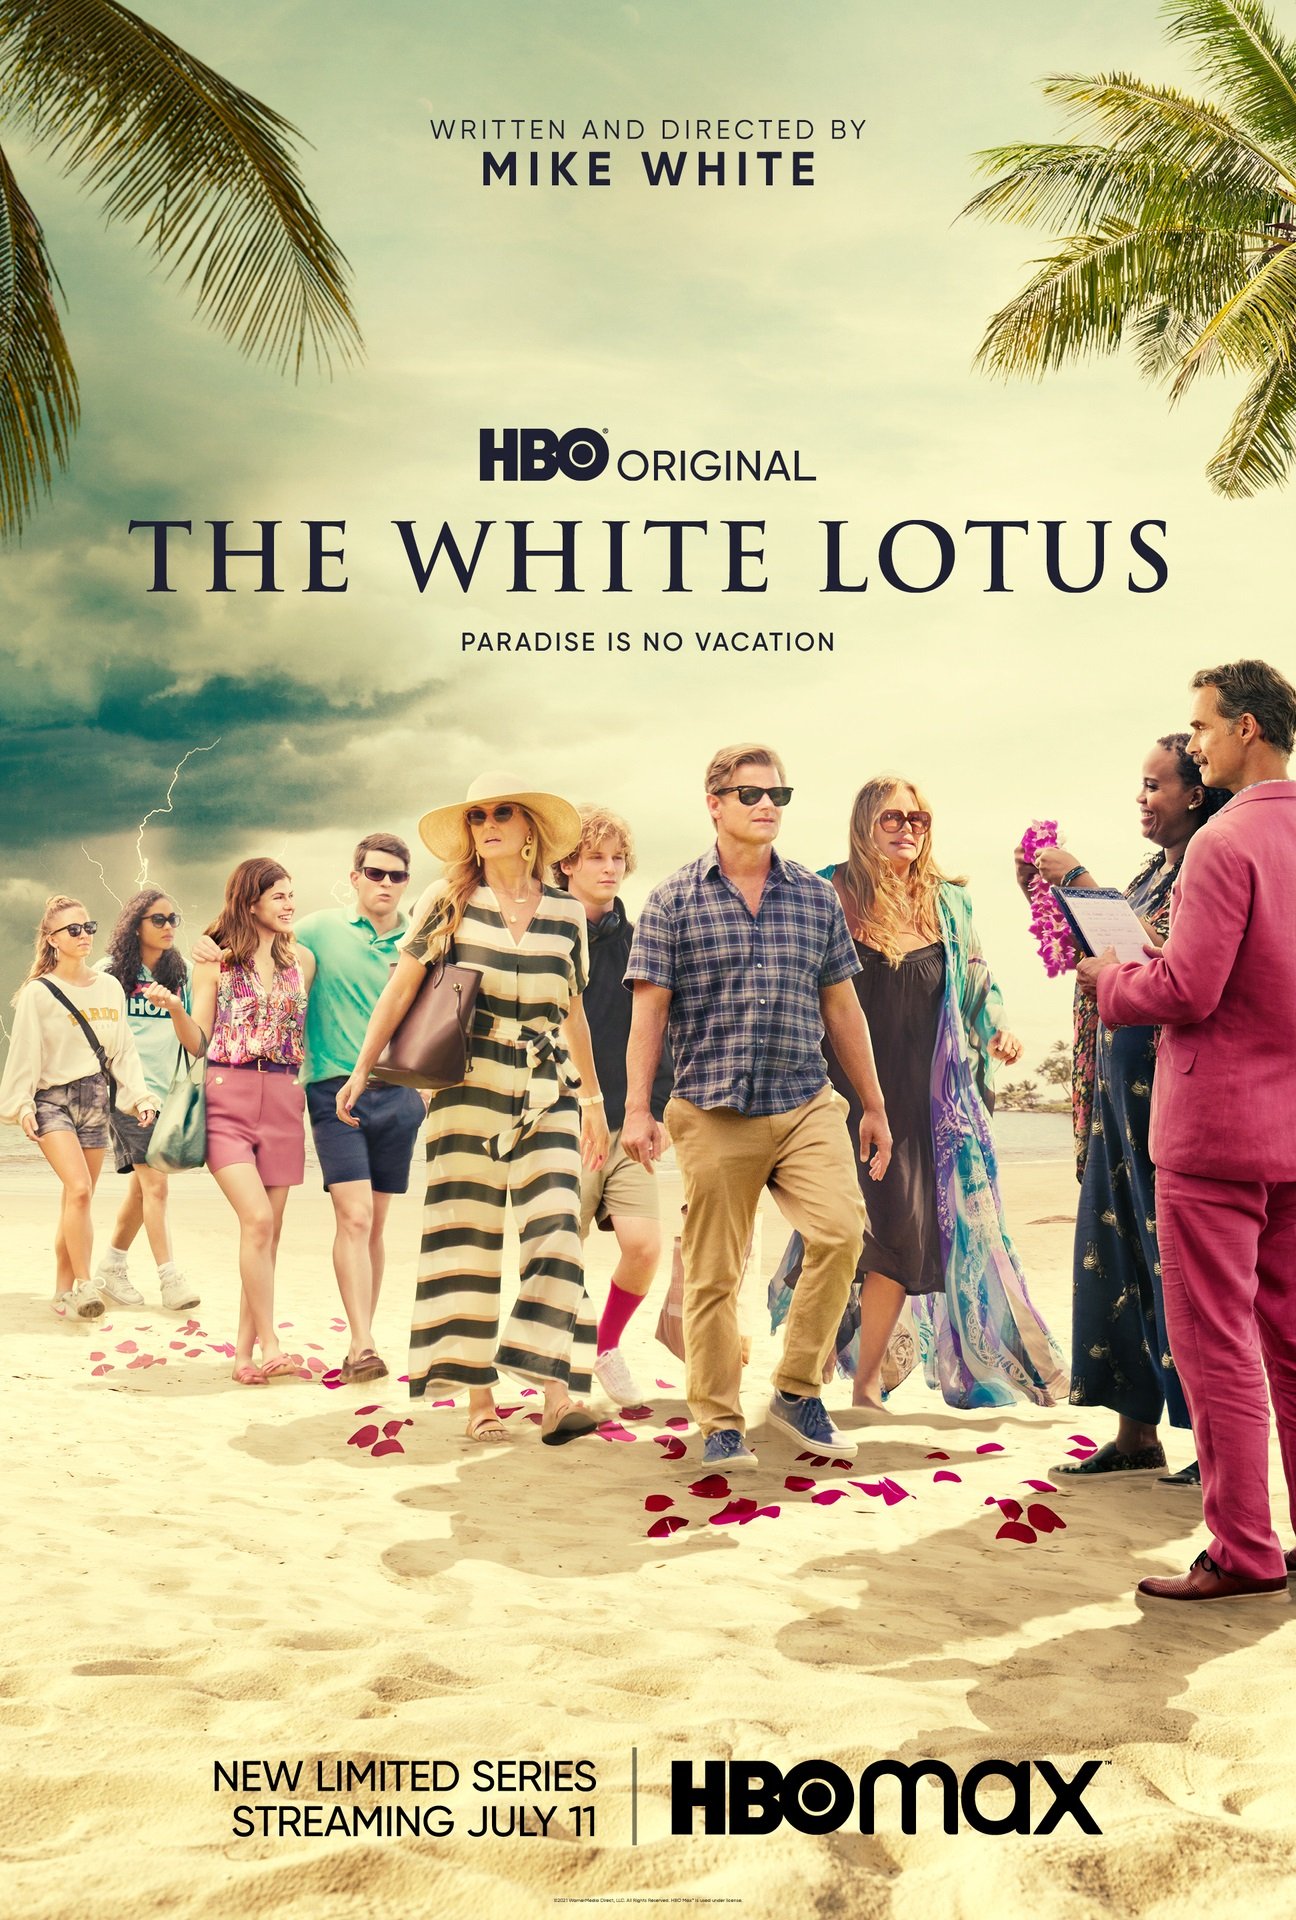 ‘The White Lotus’ Season 2 Cast: Fans Request These 3 HBO Stars